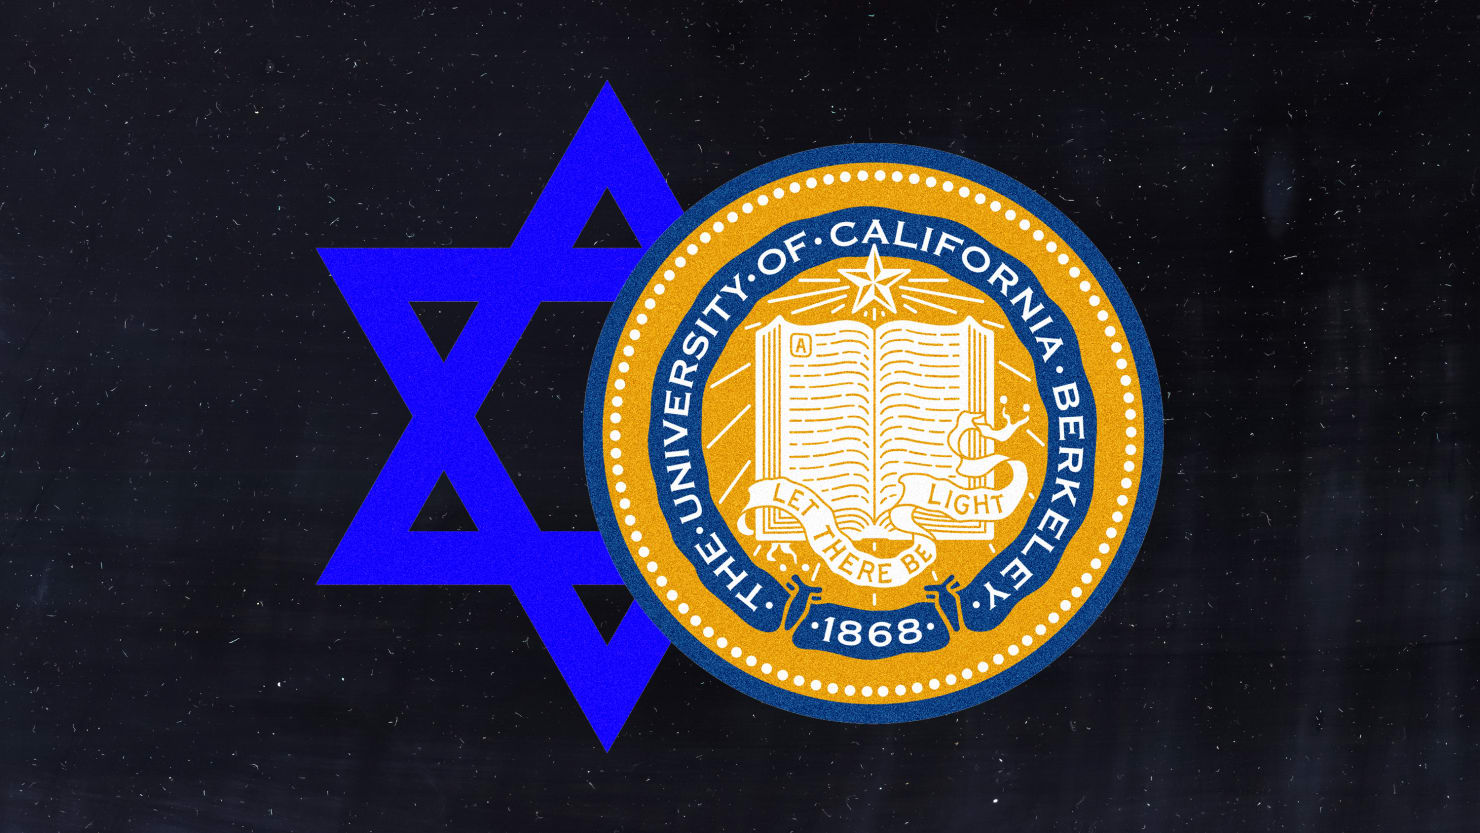 We're Jewish Berkeley Law Students, Excluded on Campus